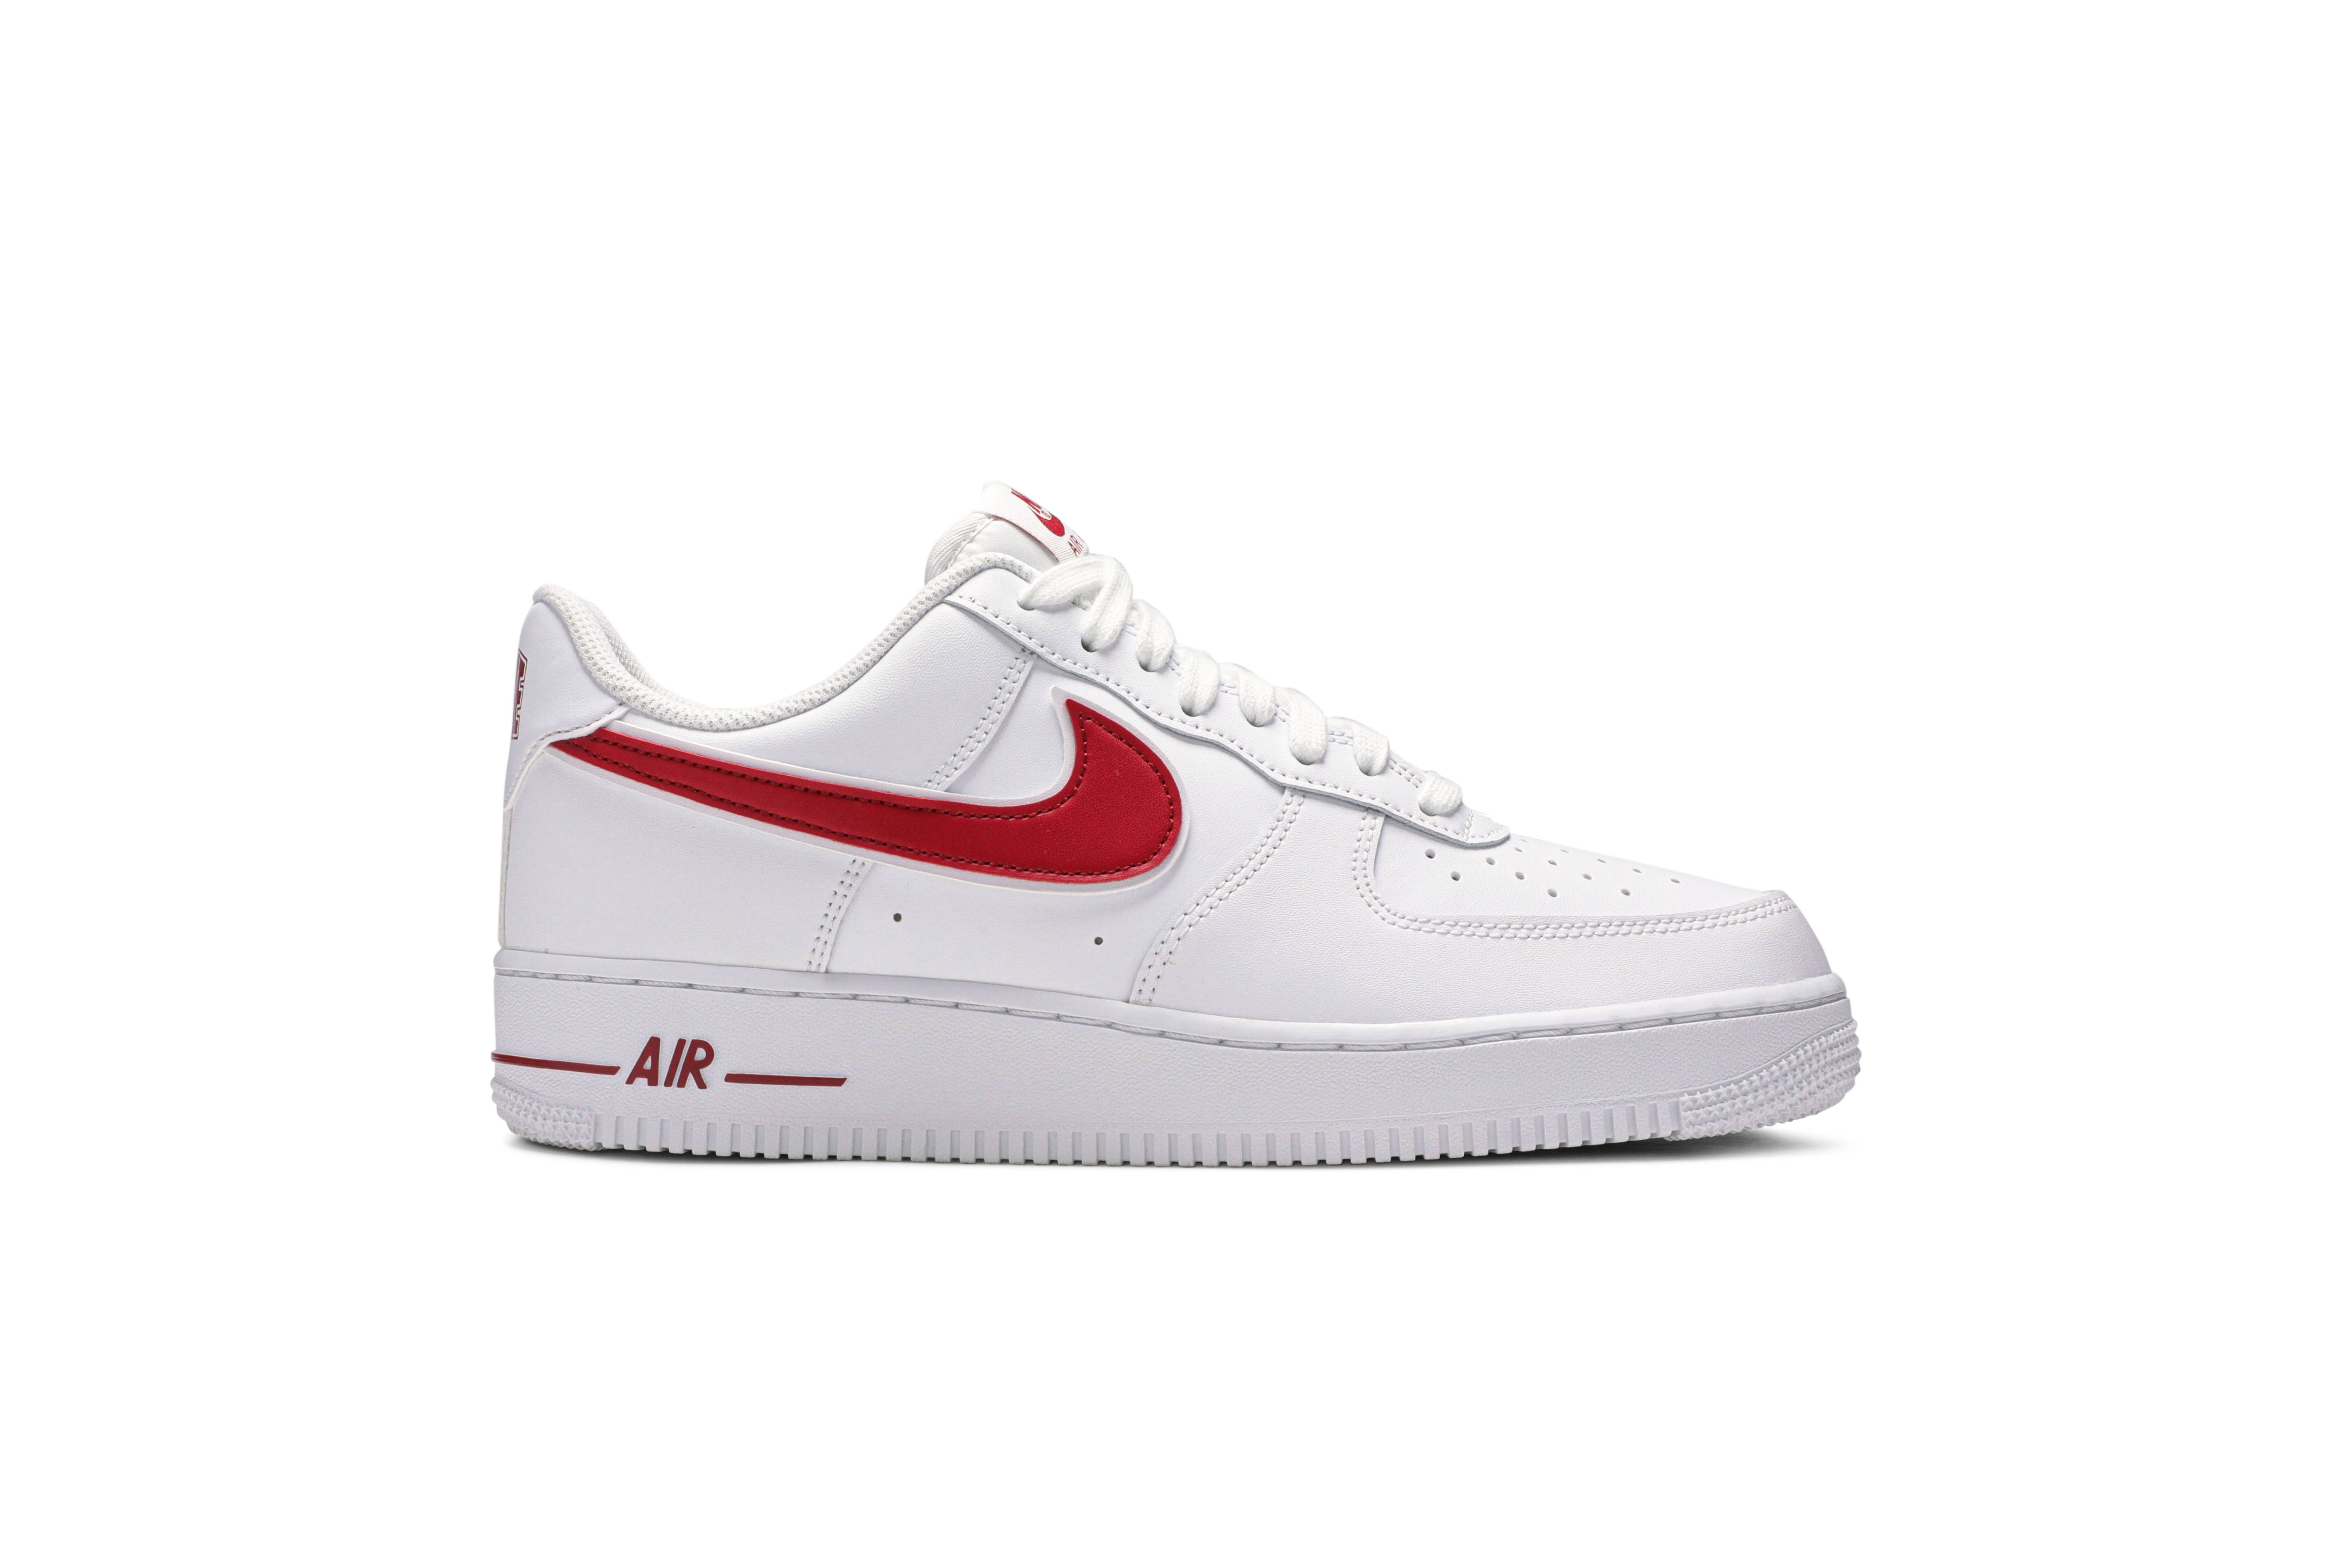 Nike Air Force 1 Low White Gym Red 